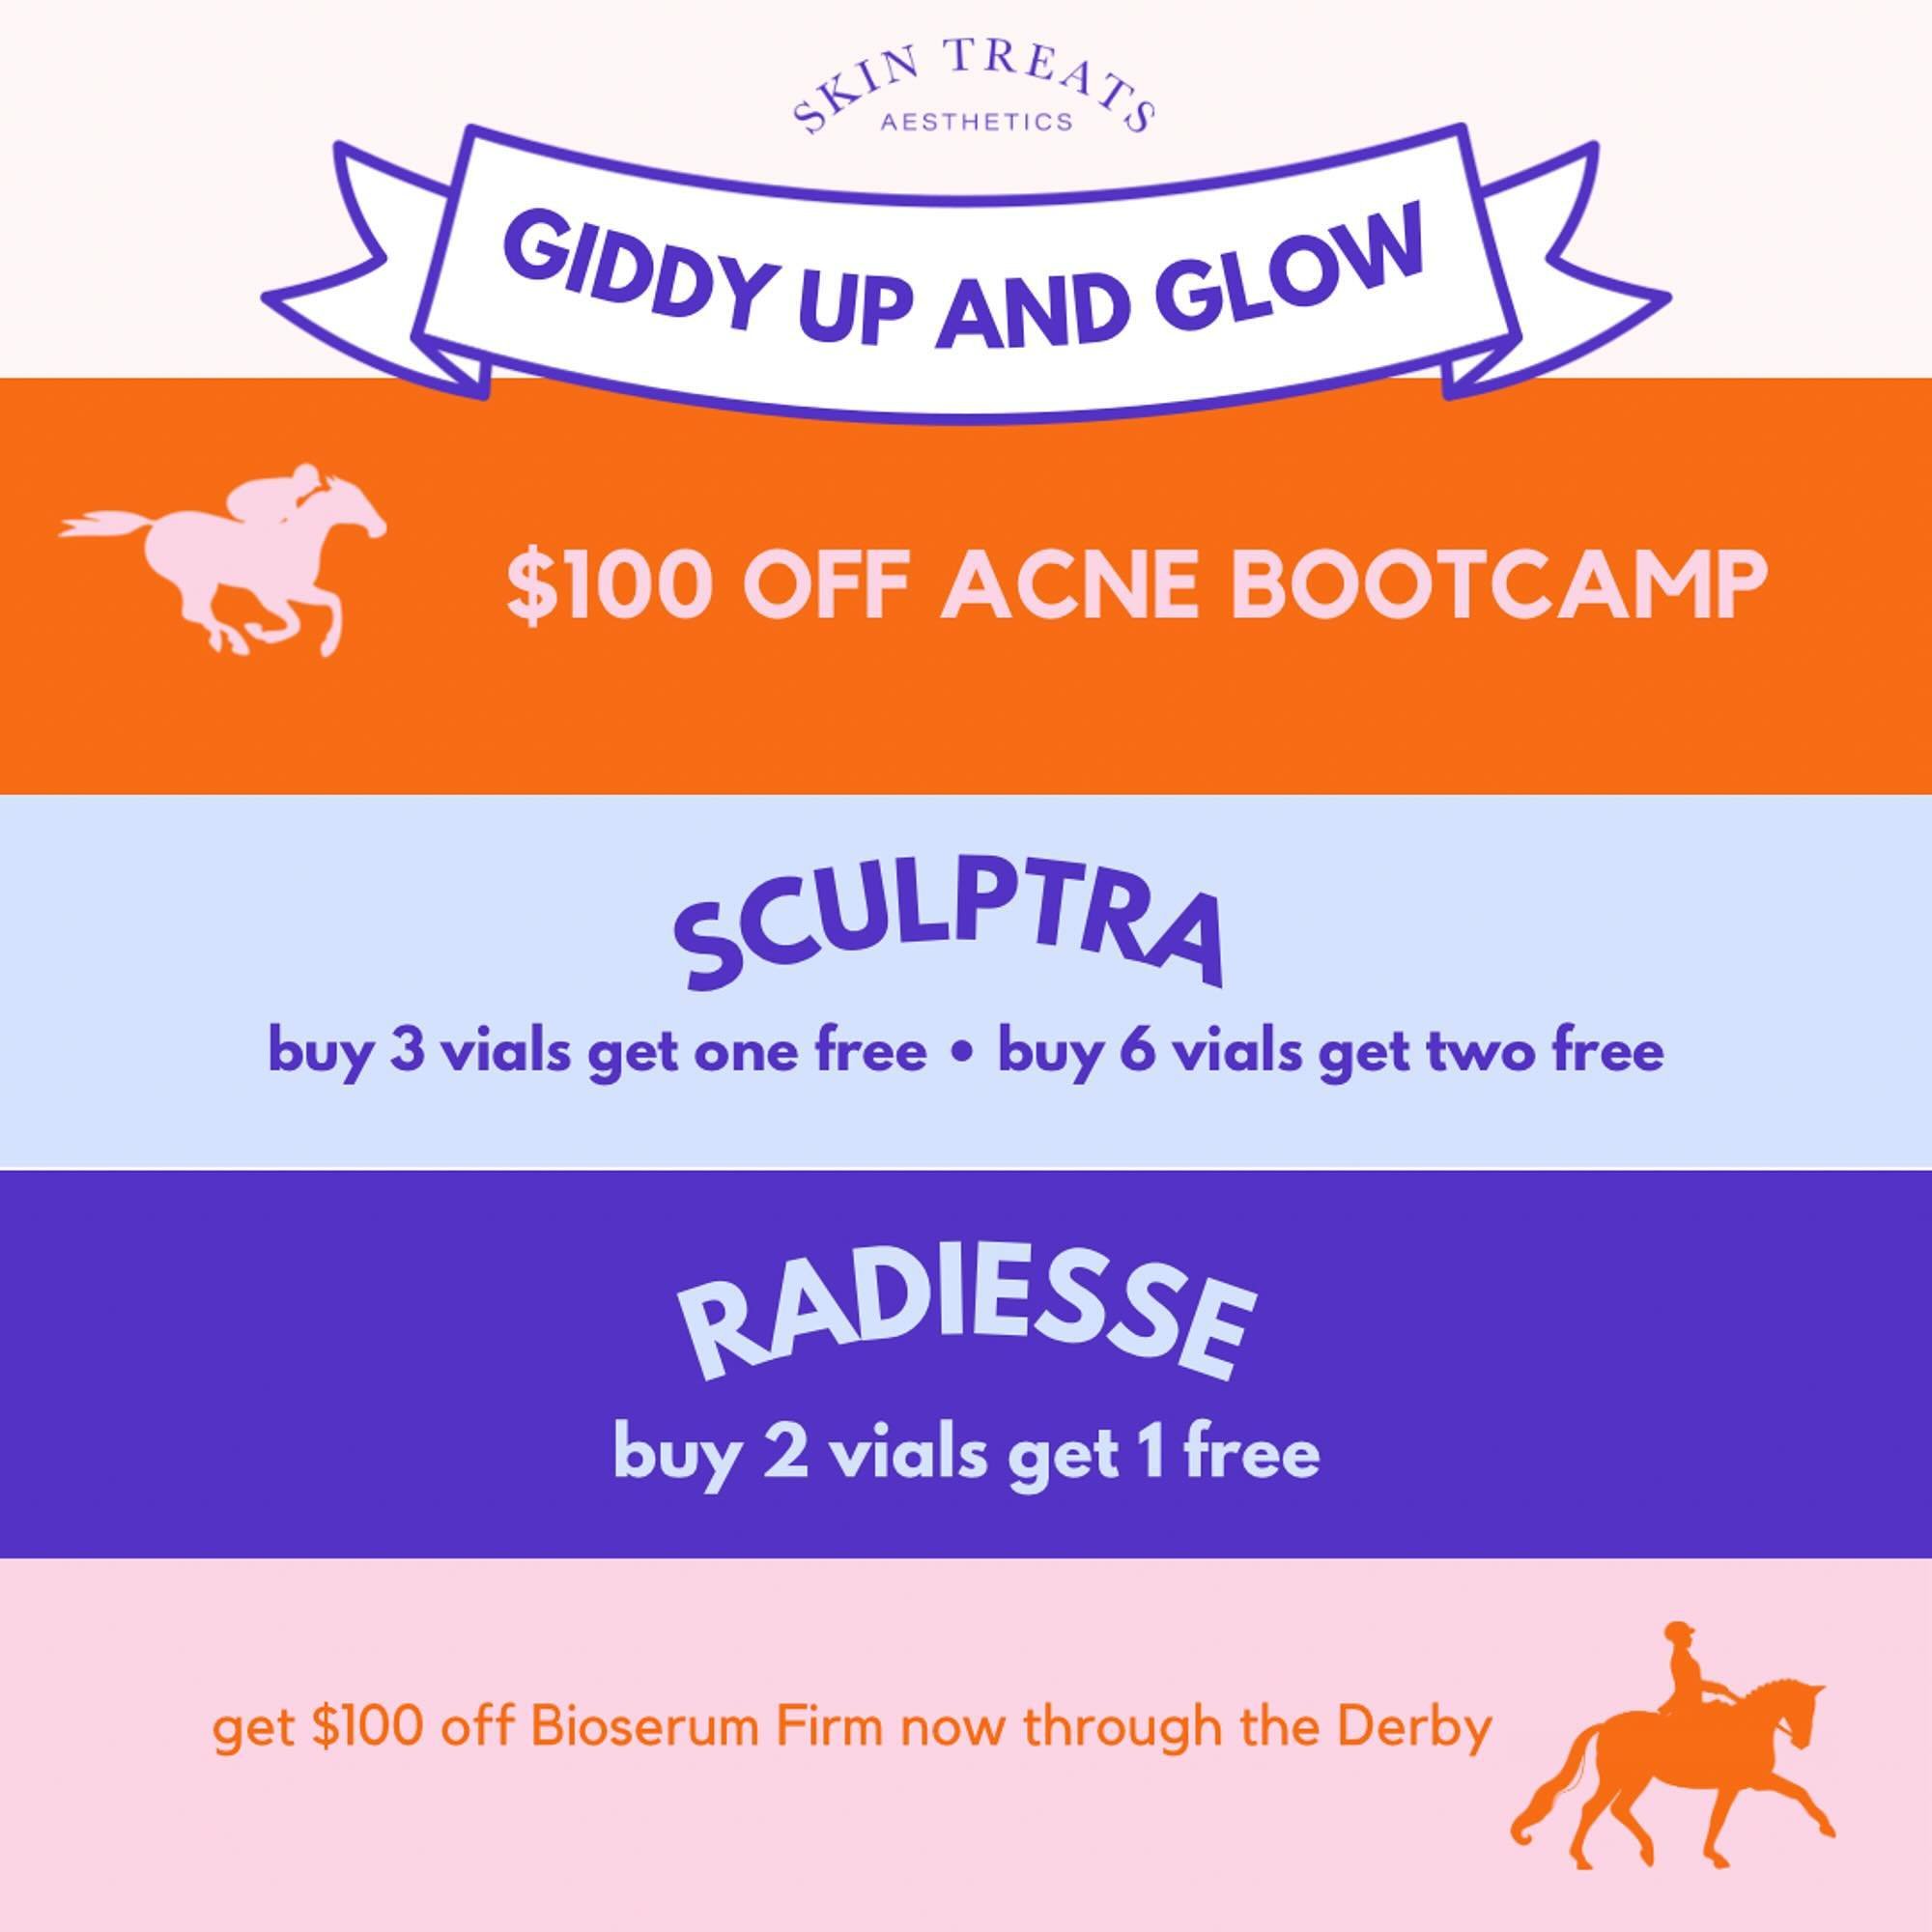 🌟🐎 𝐆𝐢𝐝𝐝𝐲 𝐮𝐩 and 𝑮𝑳𝑶𝑾

Derby season is coming up and we want to get you prepped and pamper your skin like a winner! 

1️⃣ $100 Off Acne Bootcamp: Say goodbye to pesky breakouts and hello to flawless skin! Take $100 off our Acne Bootcamp t